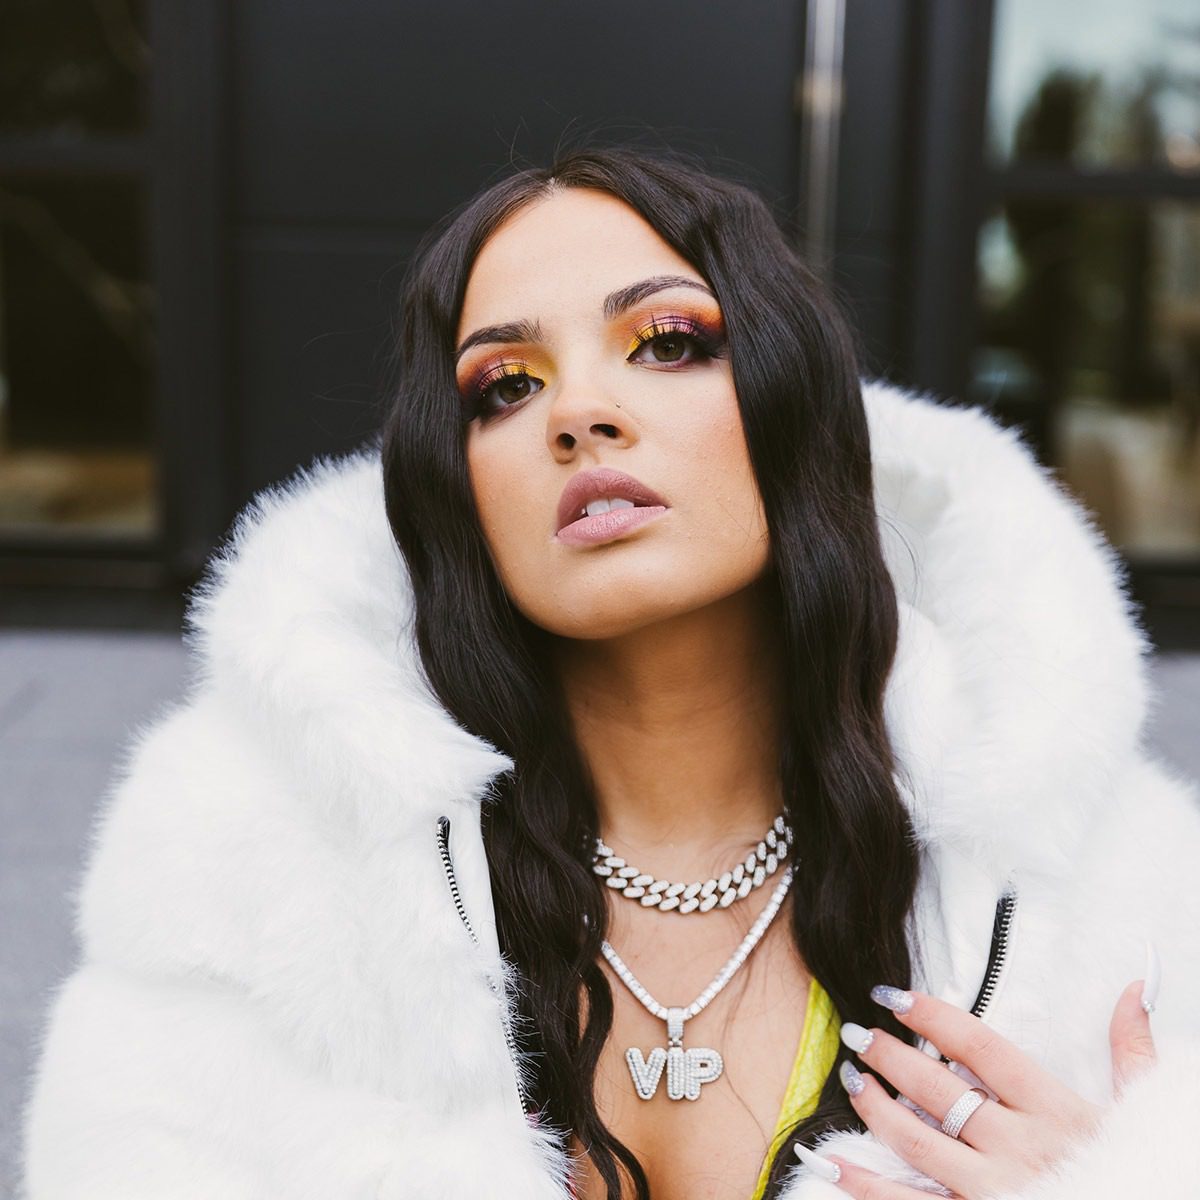 Boujee: Toronto newcomer AIRWRECKA debuts her brand new single & video